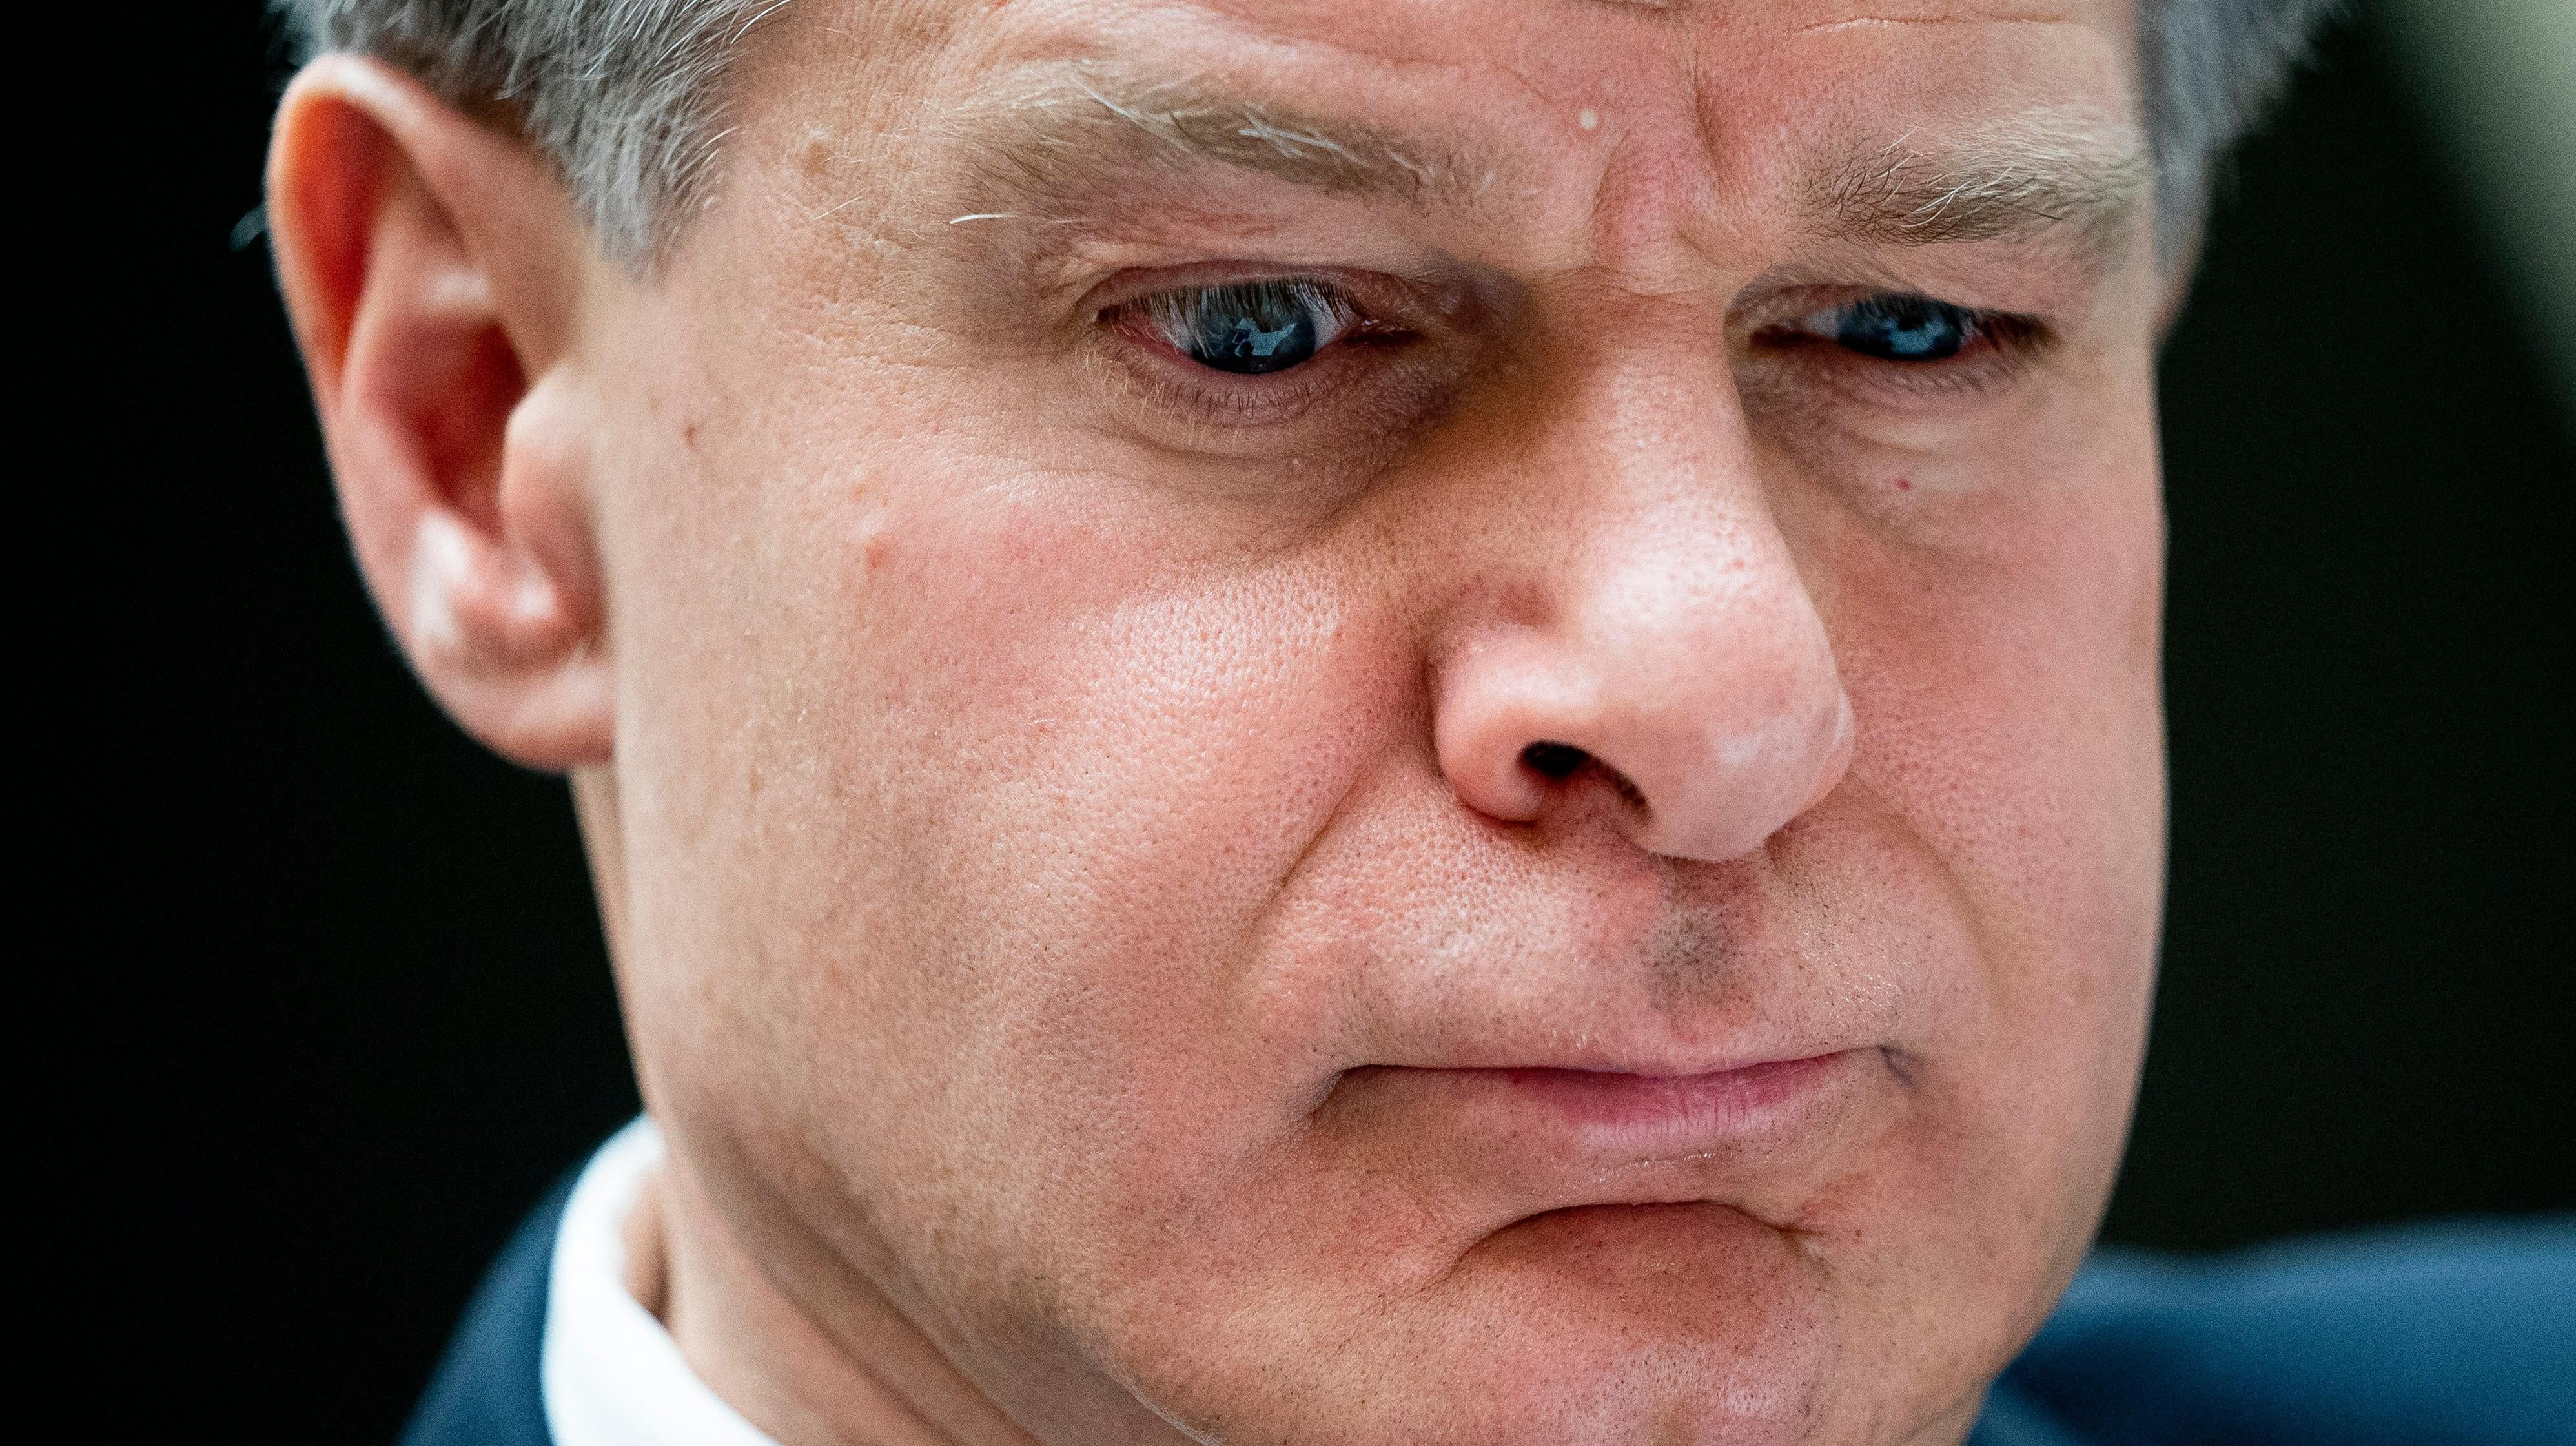 Chris Wray, director of the FBI, thinks about something during a House Intelligence Committee hearing.  (Photo: STEFANI REYNOLDS/AFP, Getty Images)